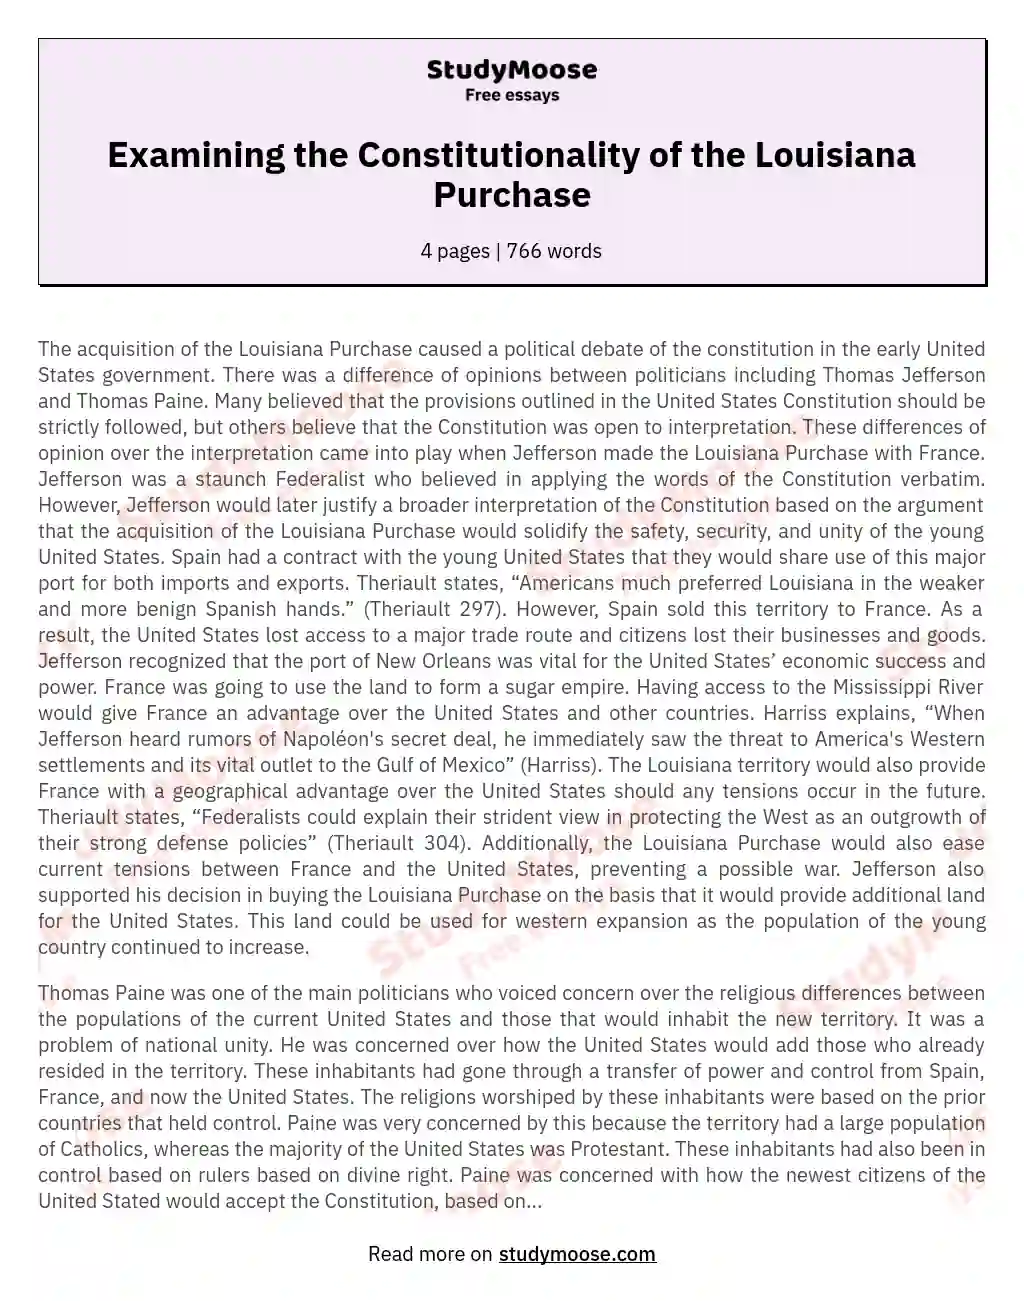 Examining the Constitutionality of the Louisiana Purchase essay